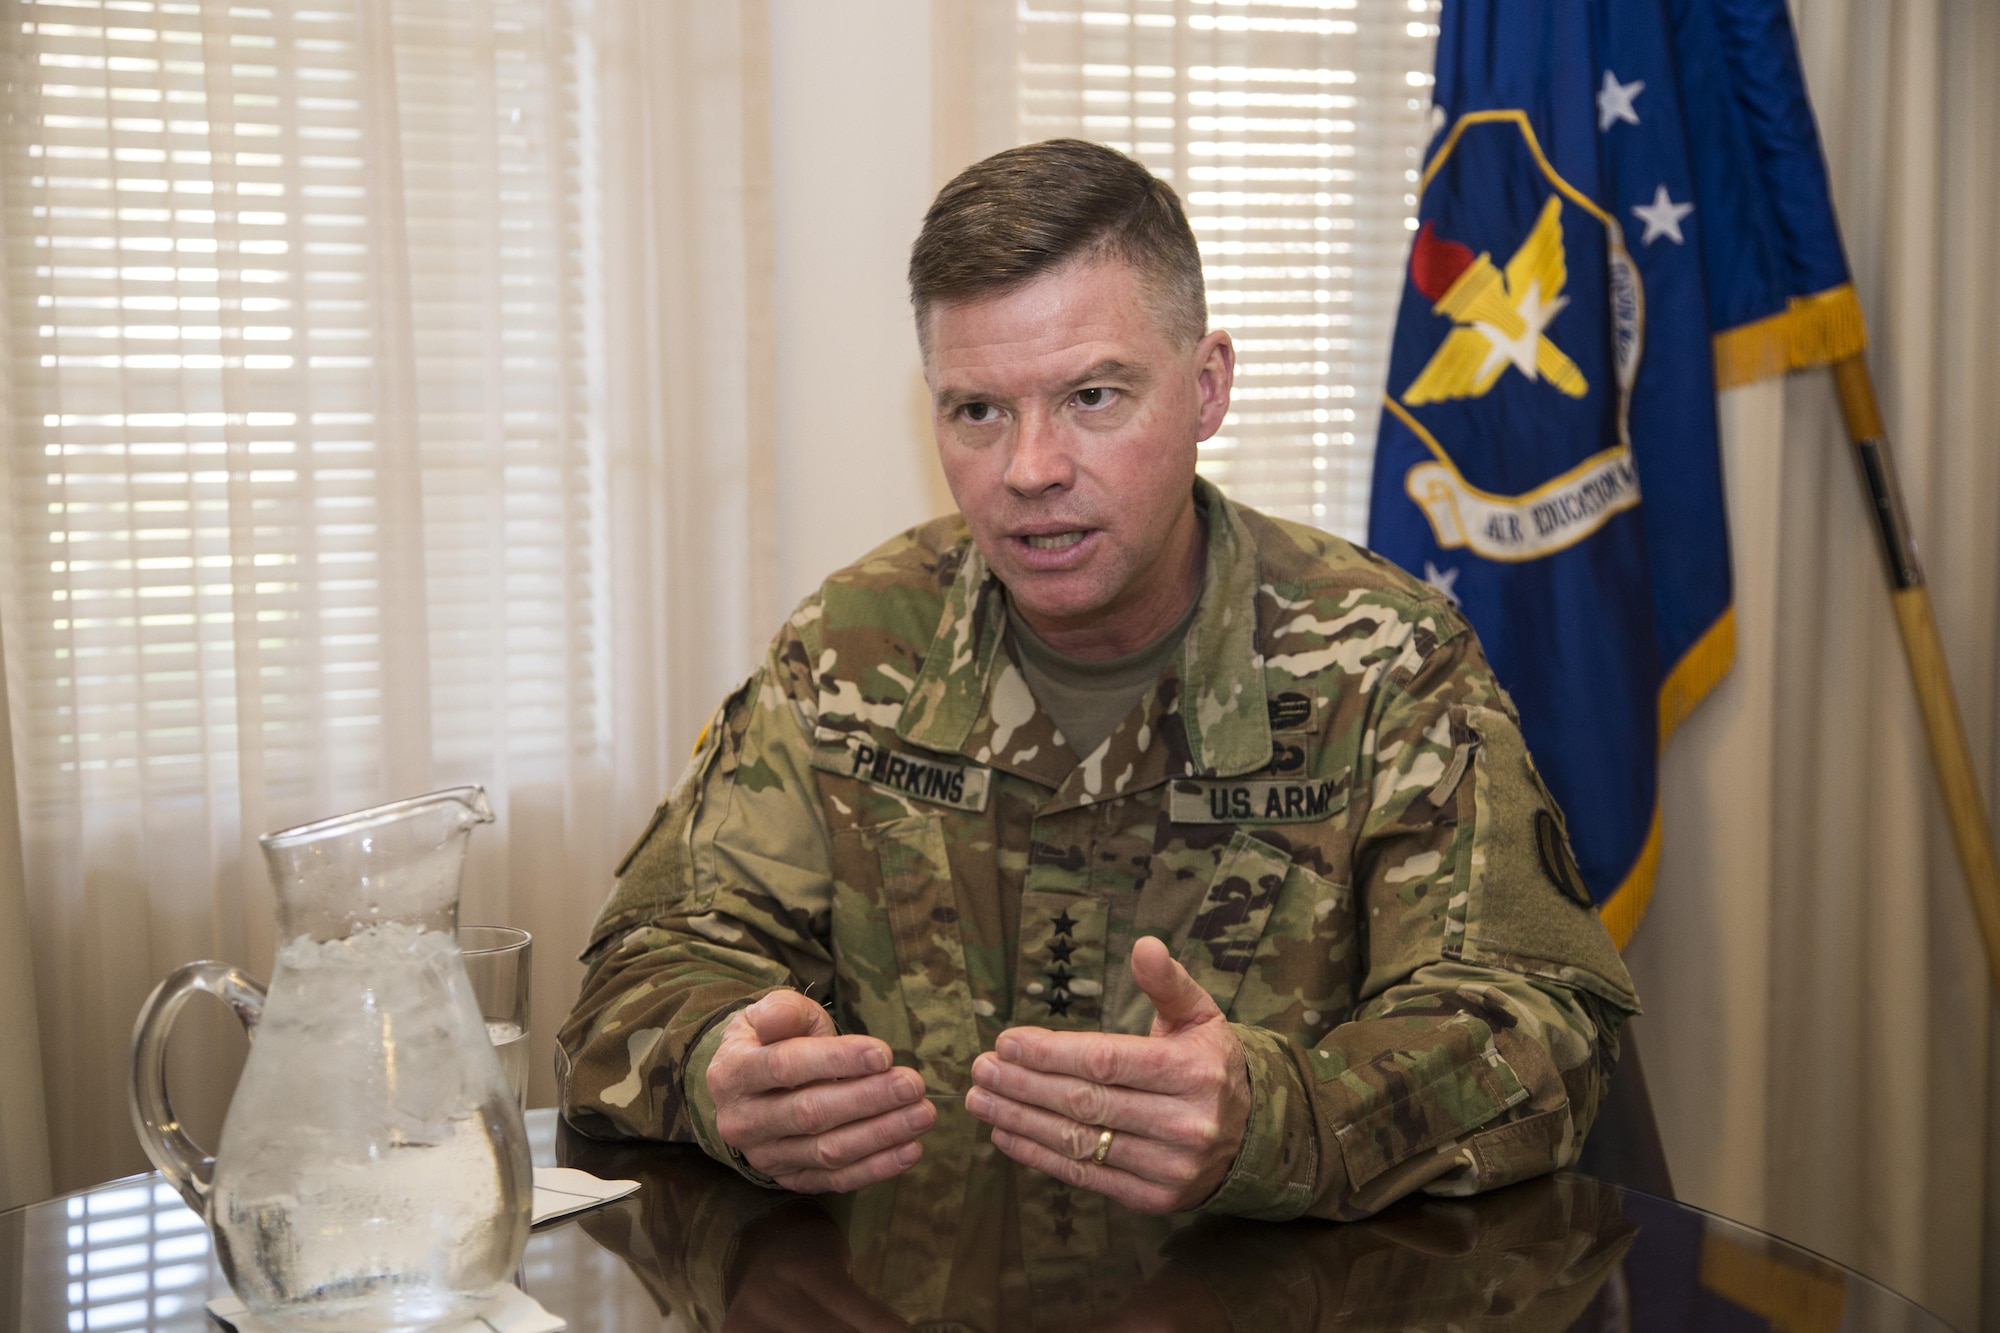 Gen. David G. Perkins, commanding general of the U.S. Army Training and Doctrine Command, visited officials from Air Education and Training Command, Jan. 7-8, to collaborate with Air Force leaders on advancing education and innovation within the respective military services. 